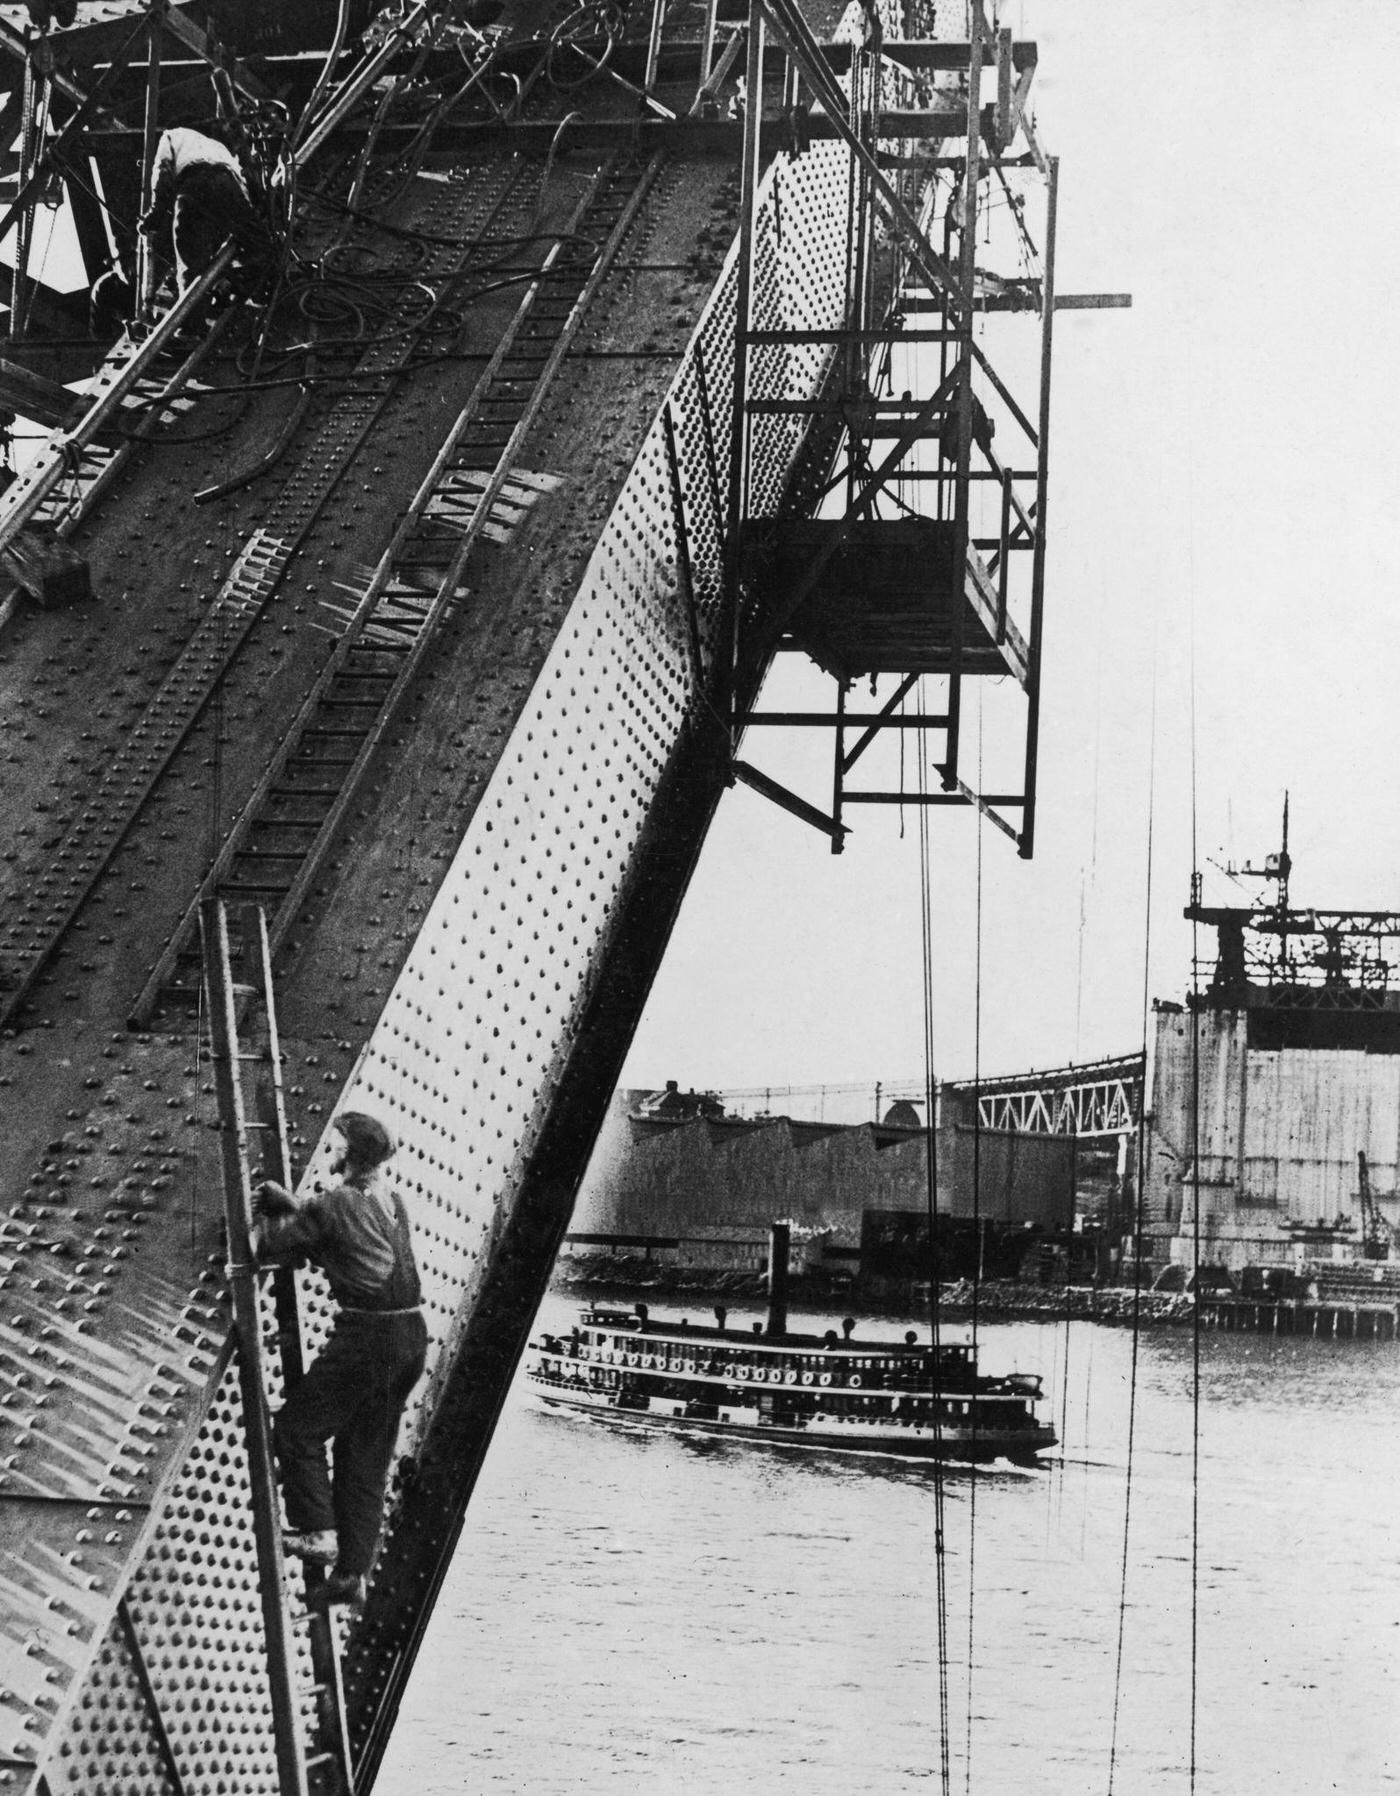 A passenger steamer passes under Sydney Harbour Bridge during the construction of its arch, 1930.